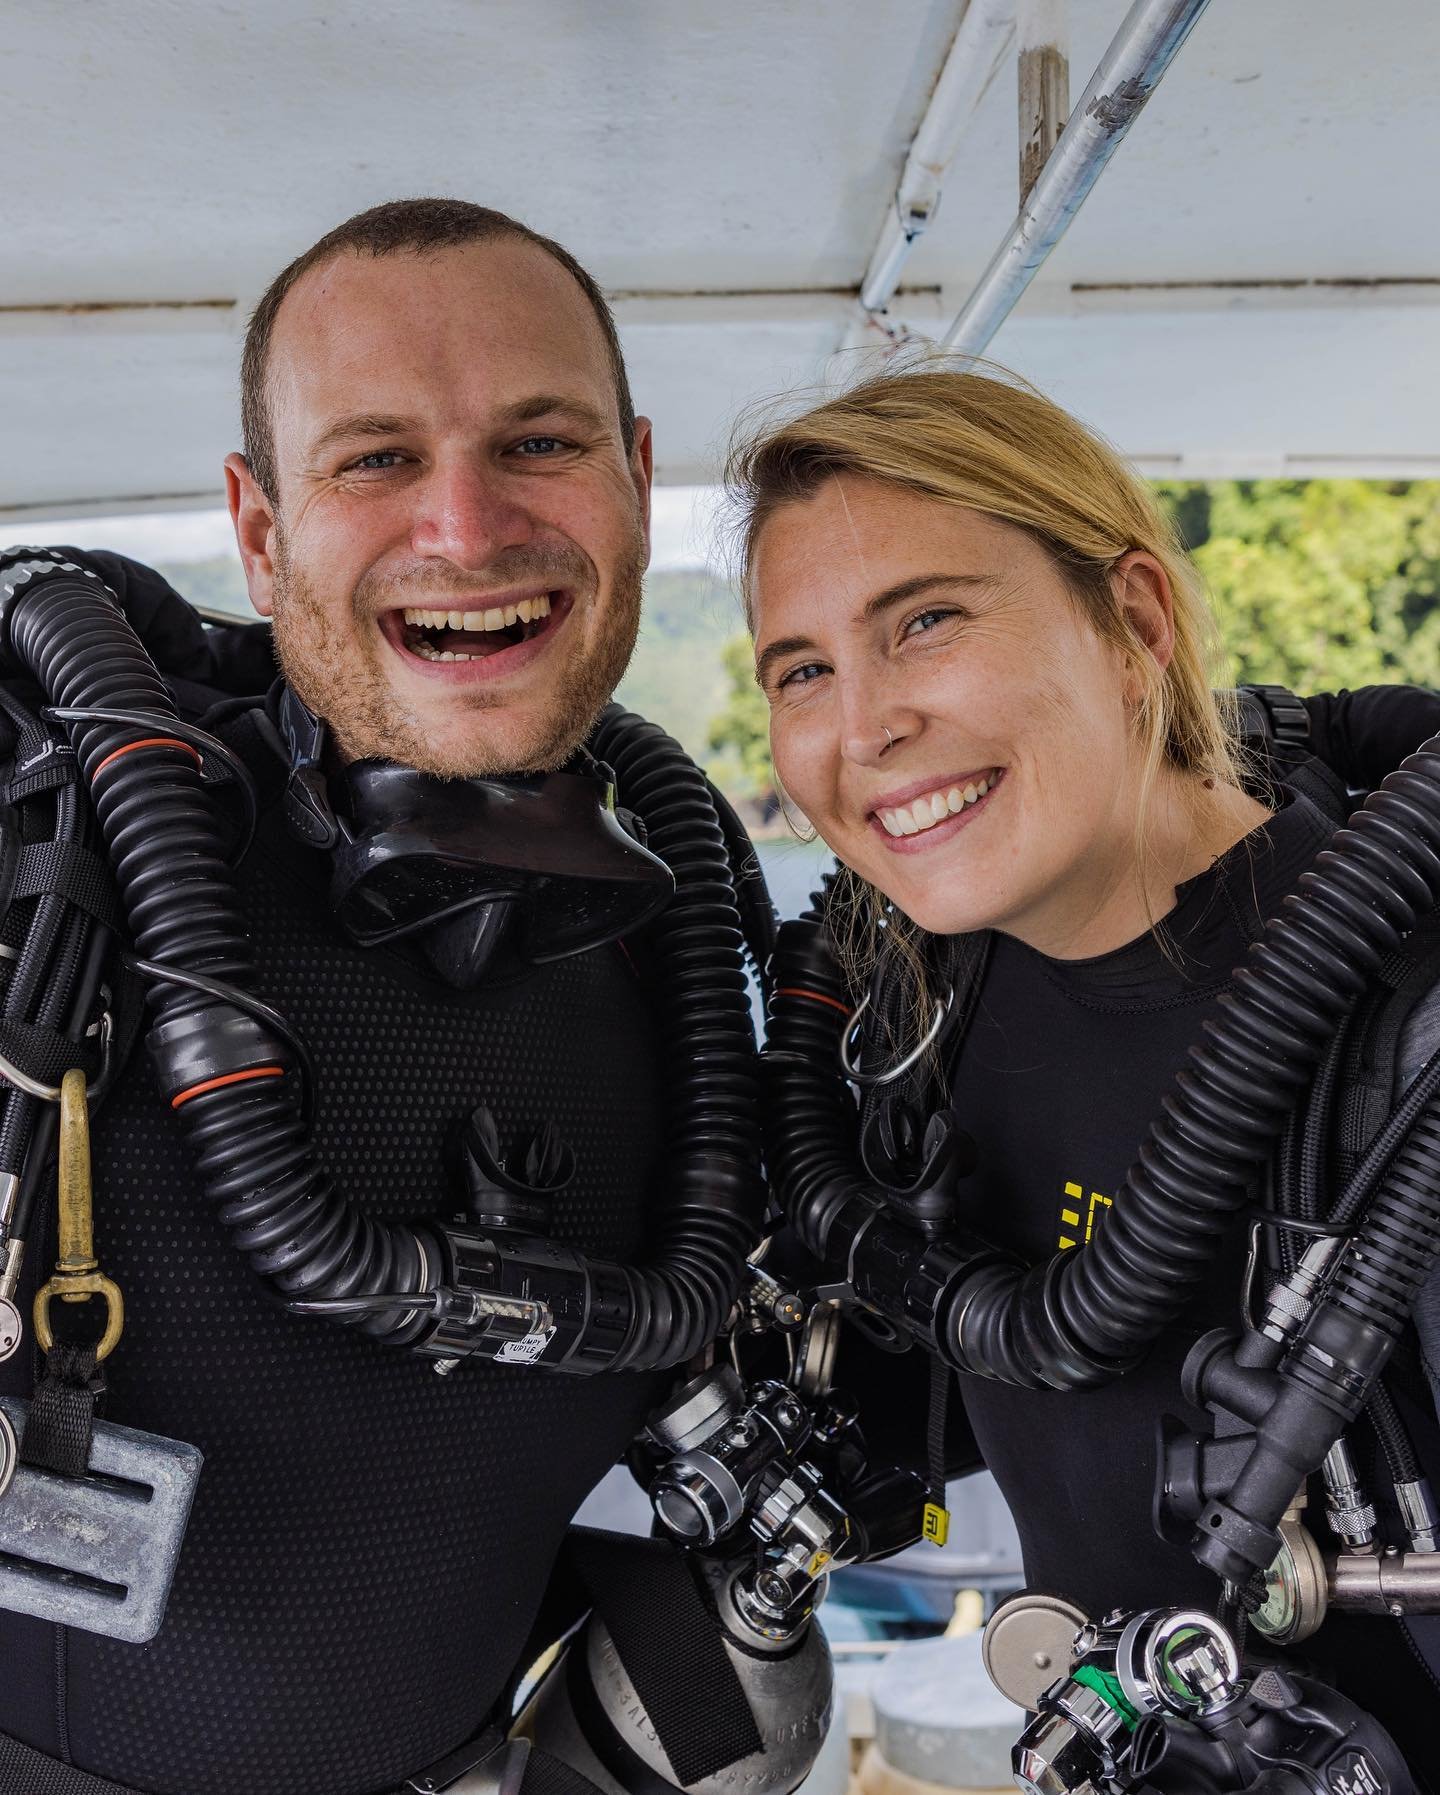 A couple of joyful moments with our wonderful crew on the very last dive on the last underwater shoot for #SecretsOfTheOctopus 🤿 🎥 🩵 

We were part of a team that spent over 1000 hours underwater shooting this series, and it premiers on @disneyplu